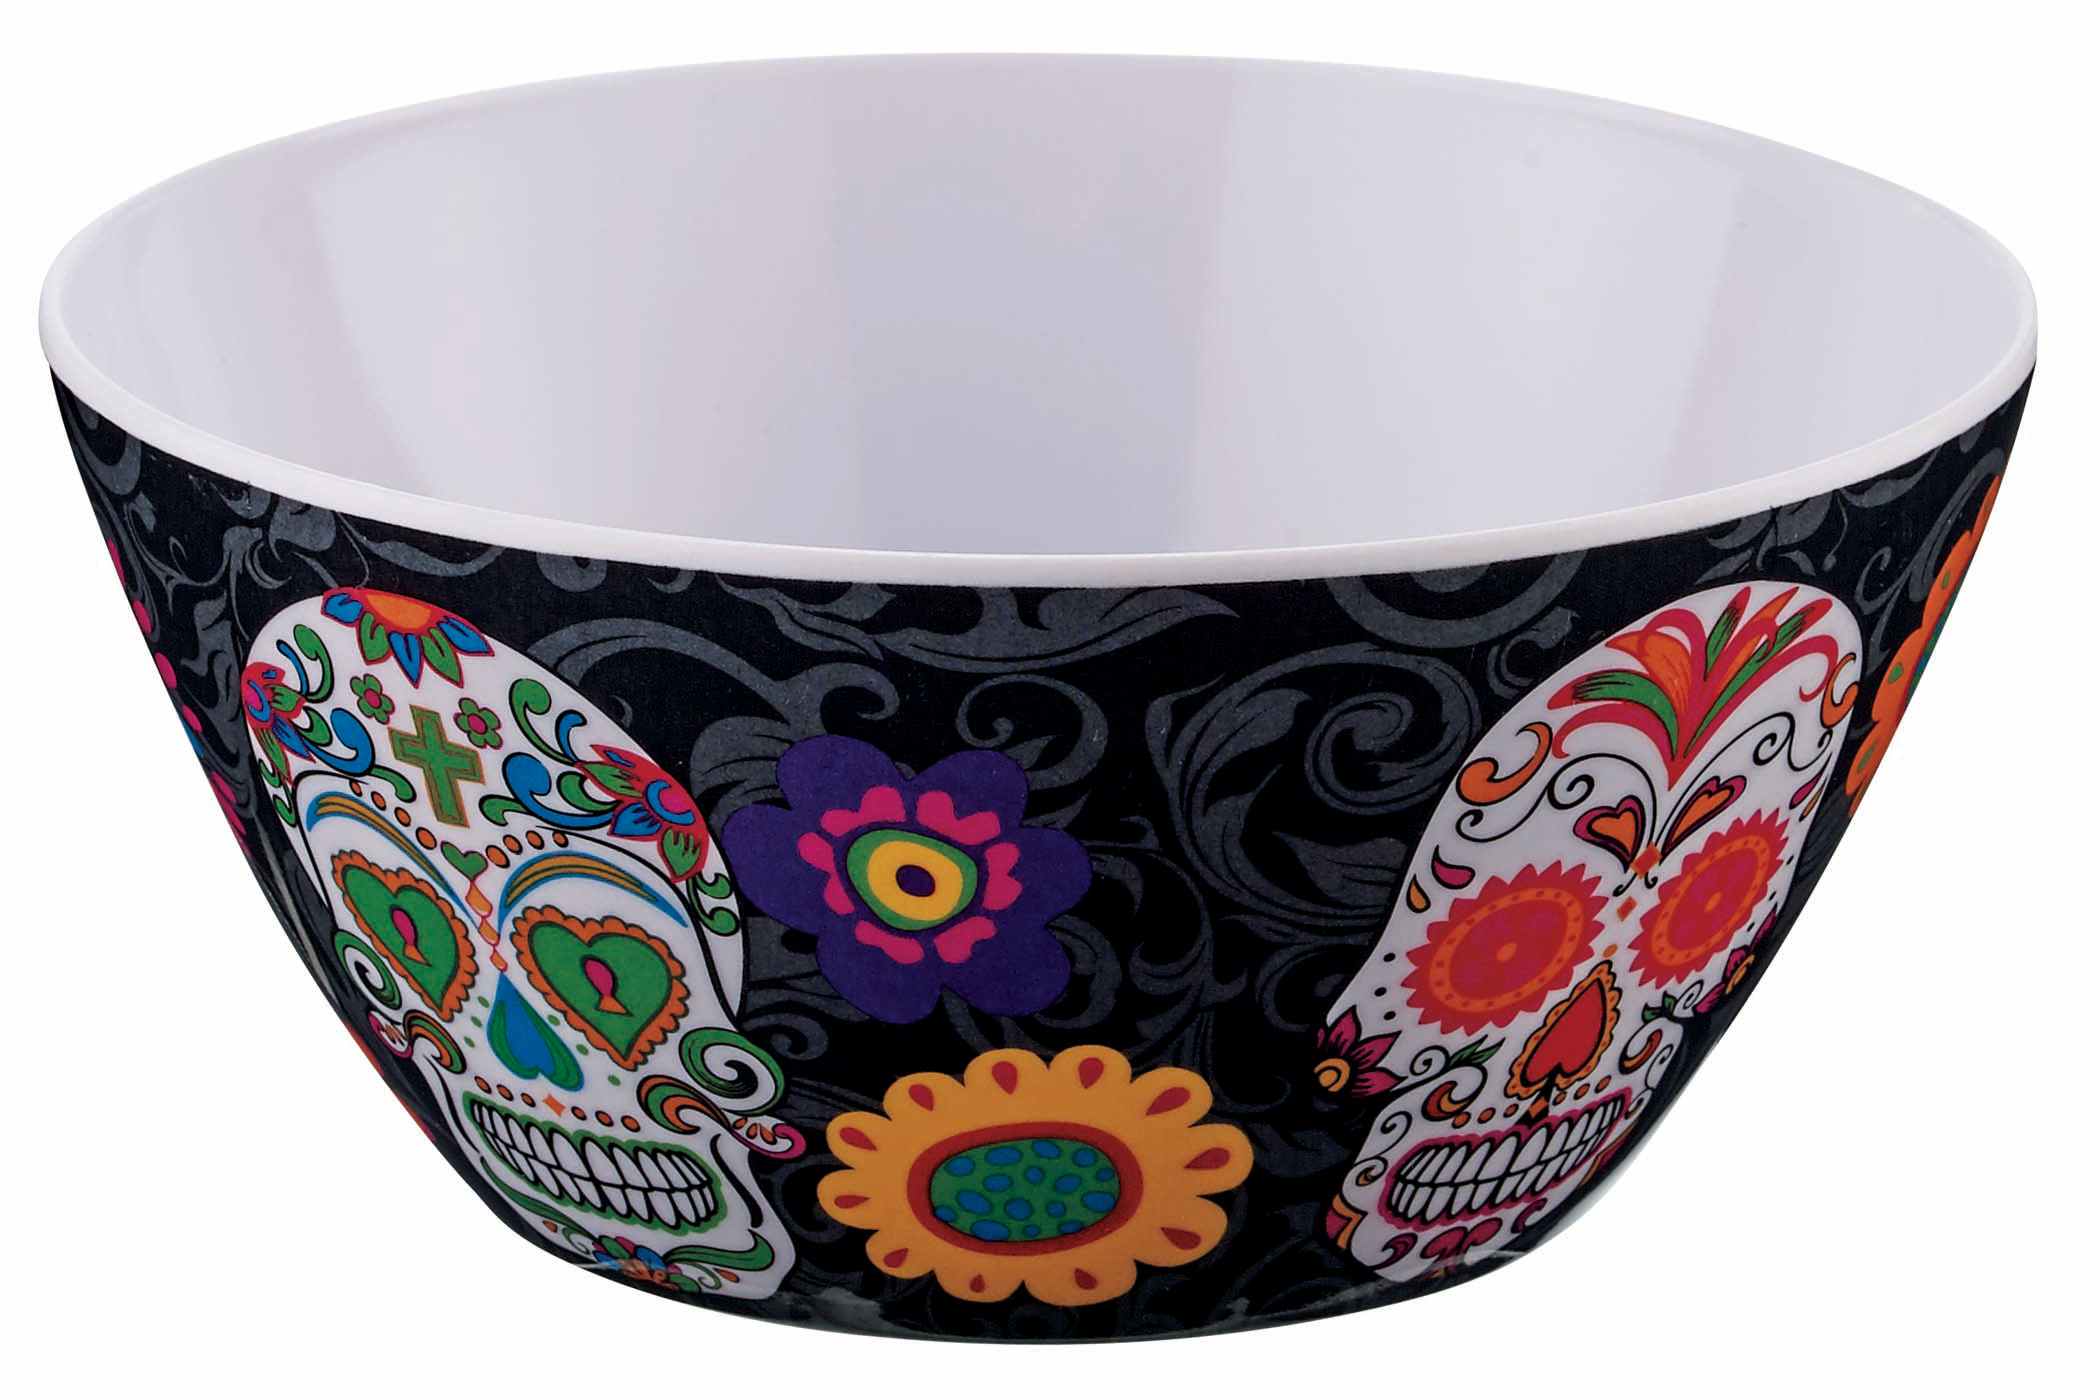 Cocinaware Day Of The Dead Skull Small Bowl; image 1 of 2